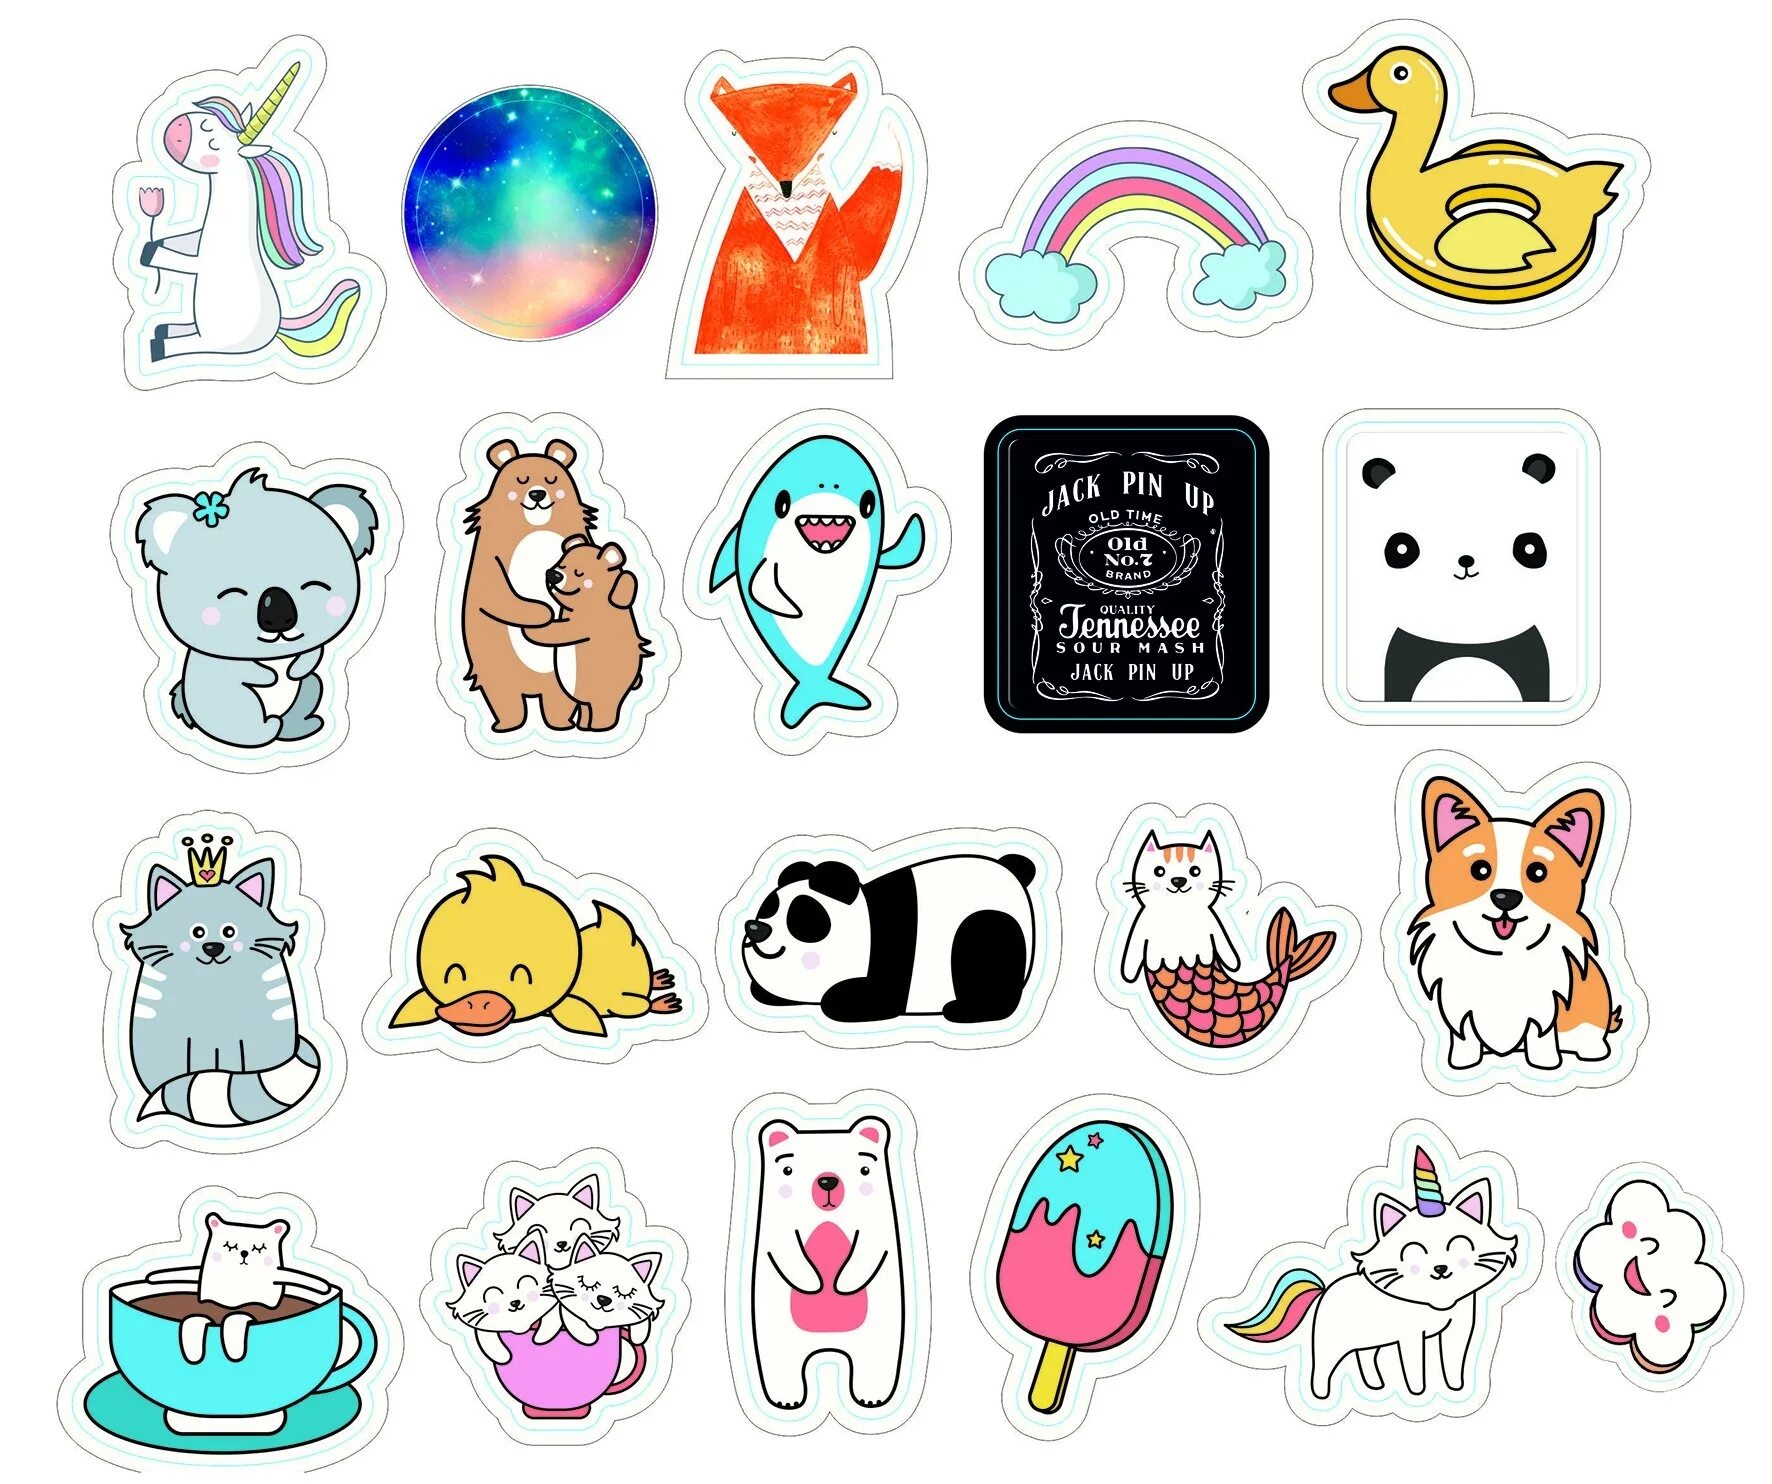 Mini drawings for making stickers #11